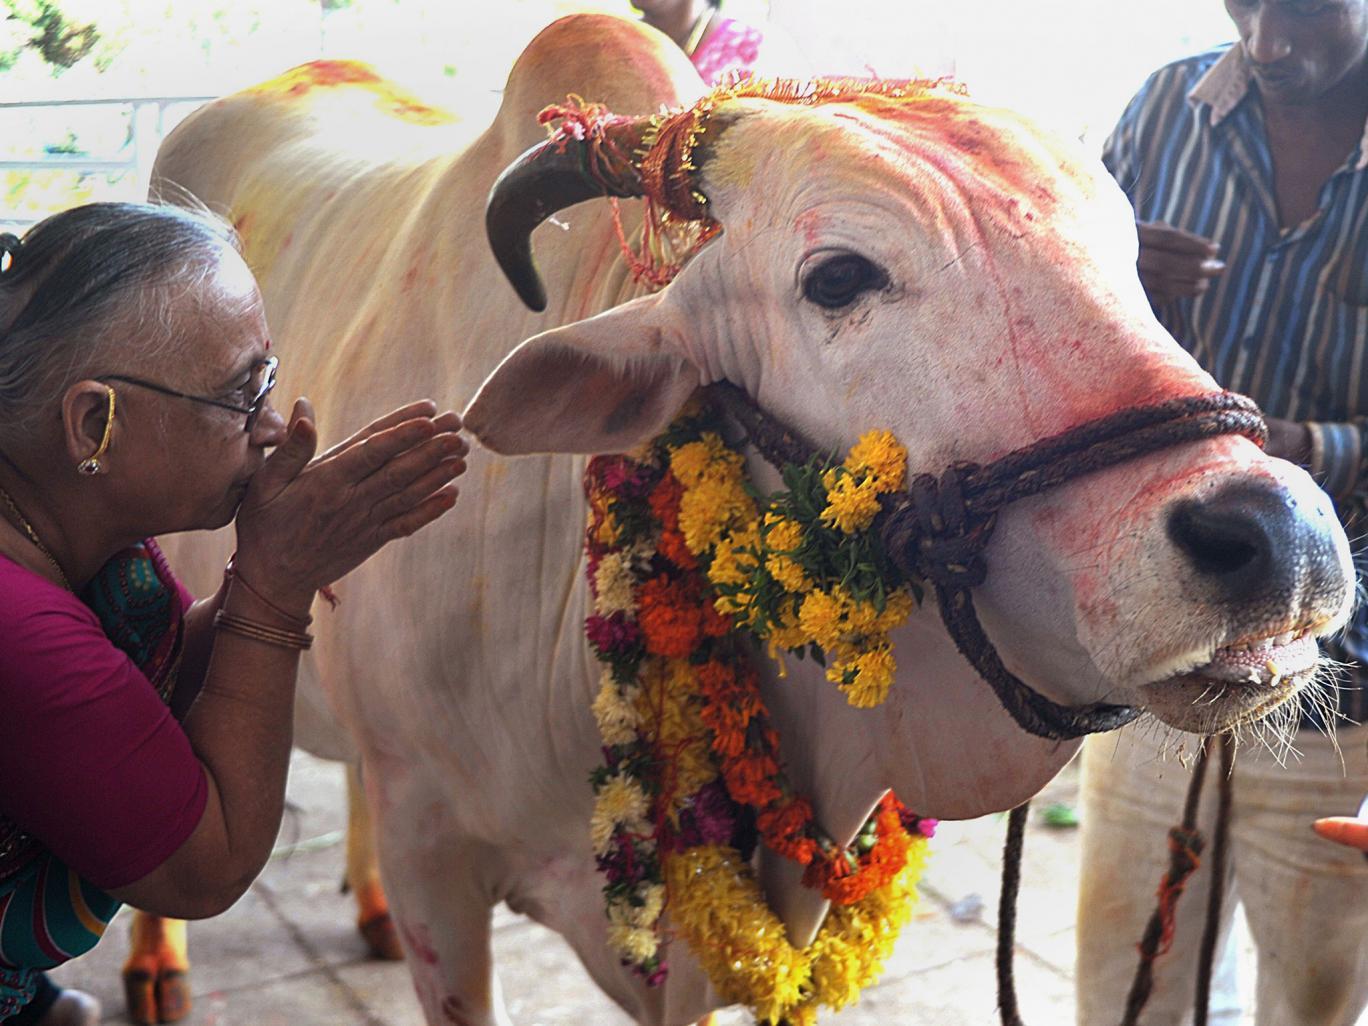 Cows are considered sacred by Hindus and their slaughter is illegal in several Indian states